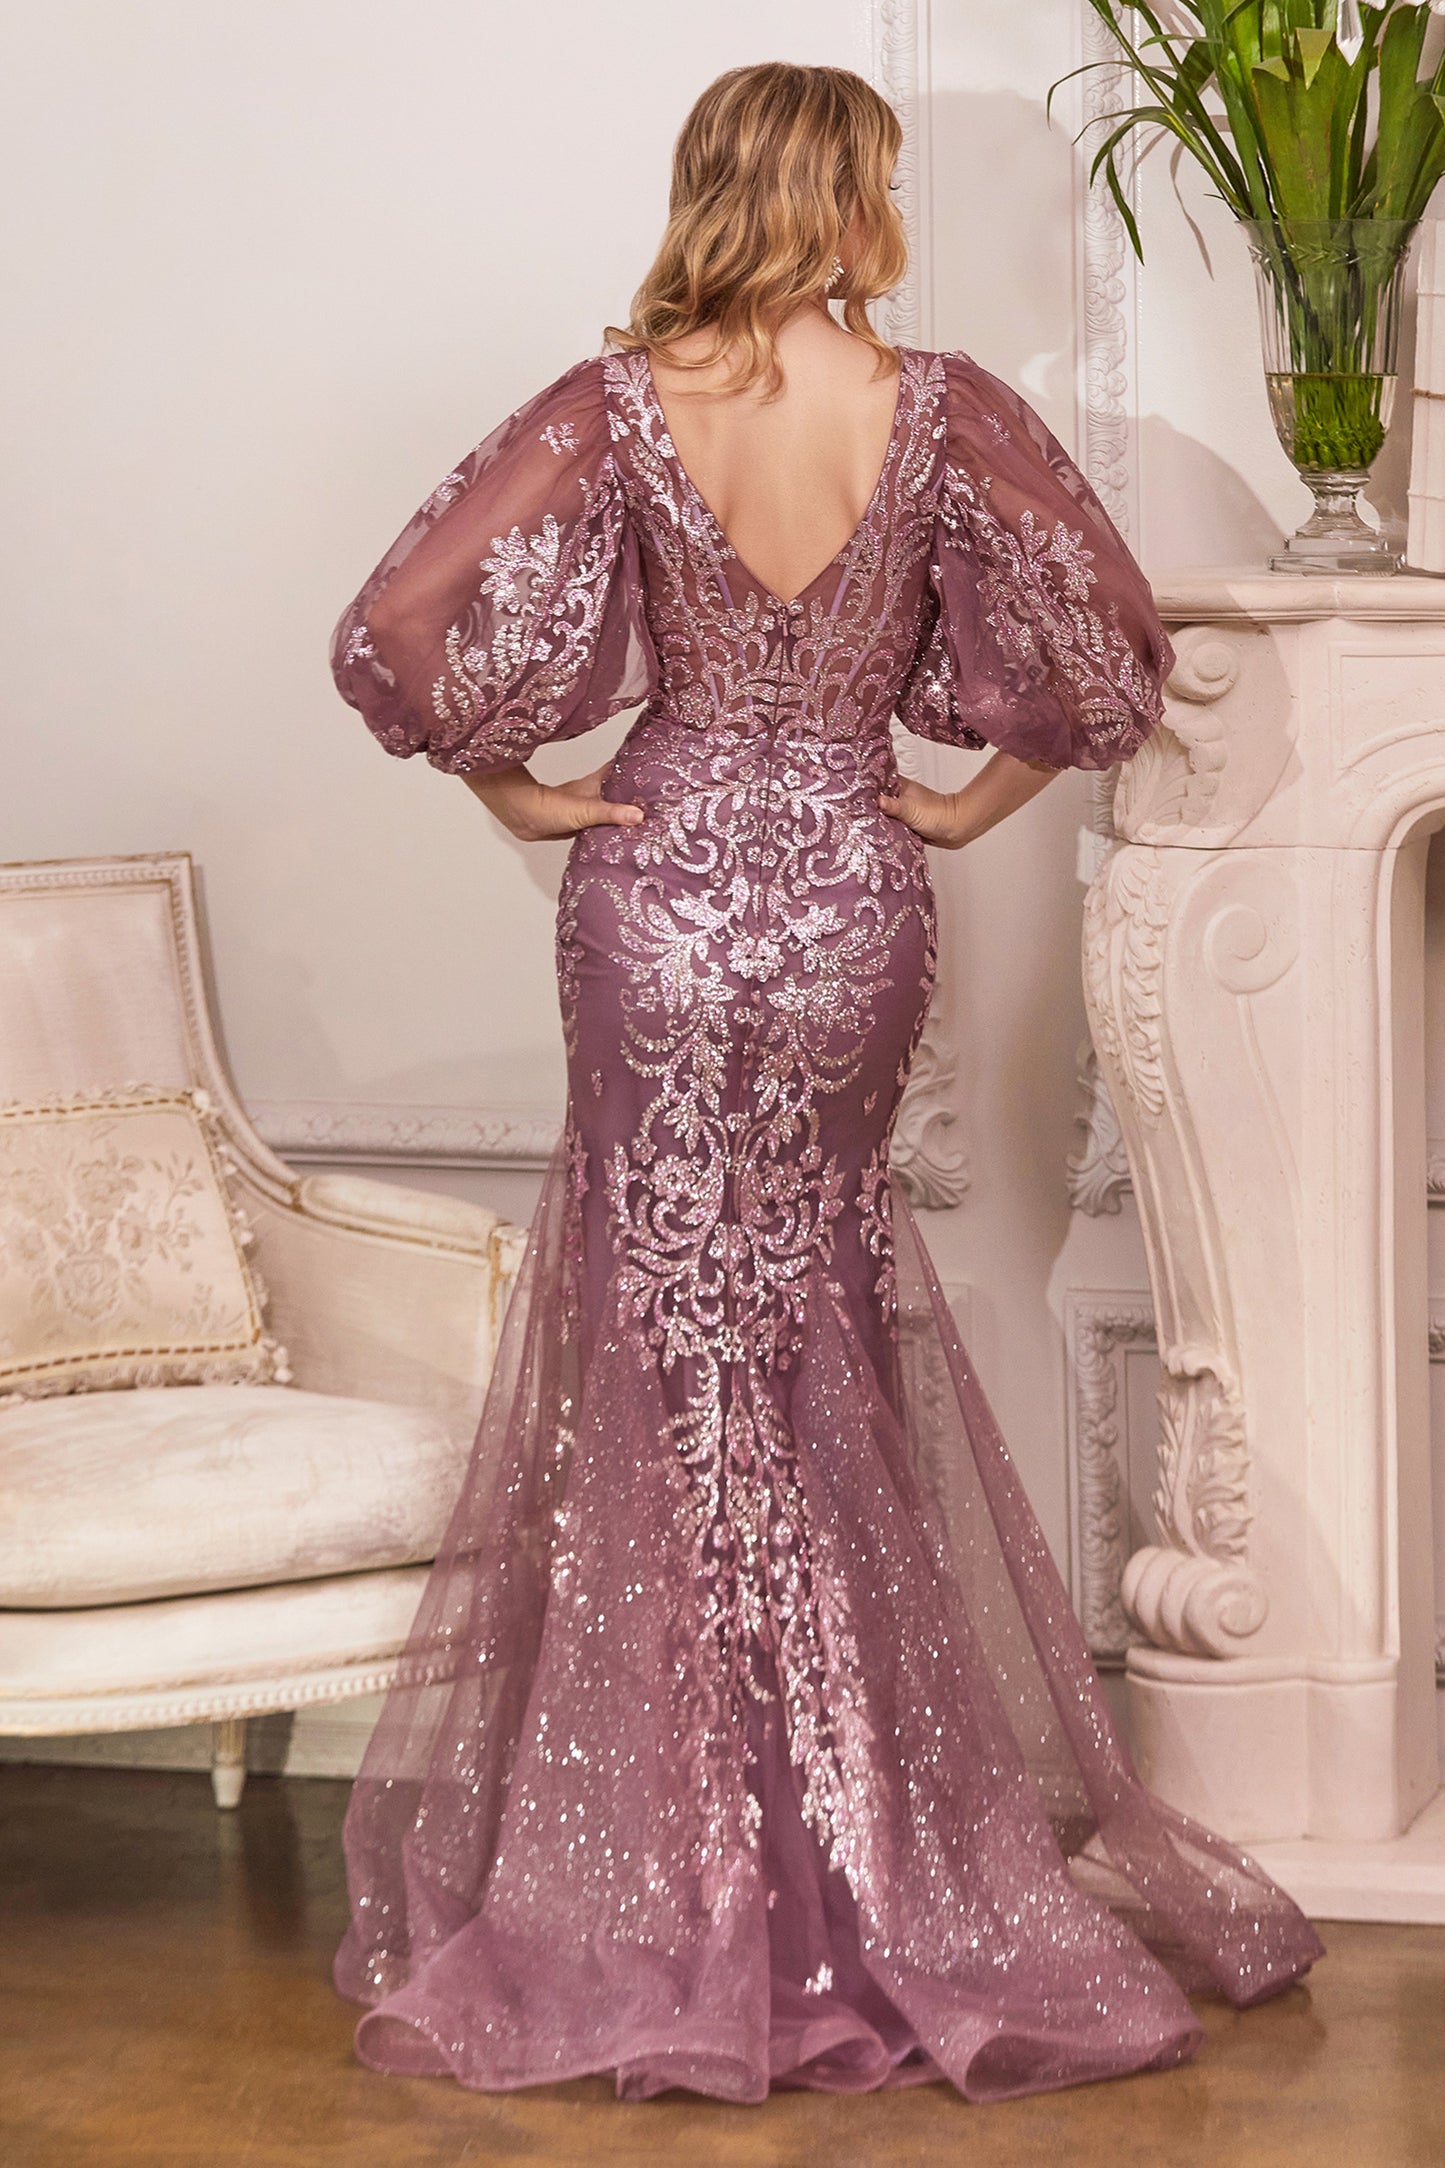 This mermaid beauty is embellished with metallic glitter and beaded scroll design. The puff three-quarter keyhole sleeve joins the boned corset sheer bodice. With a fitted under skirt the bottom overlay fans out with godets and trailing train Cinderella D